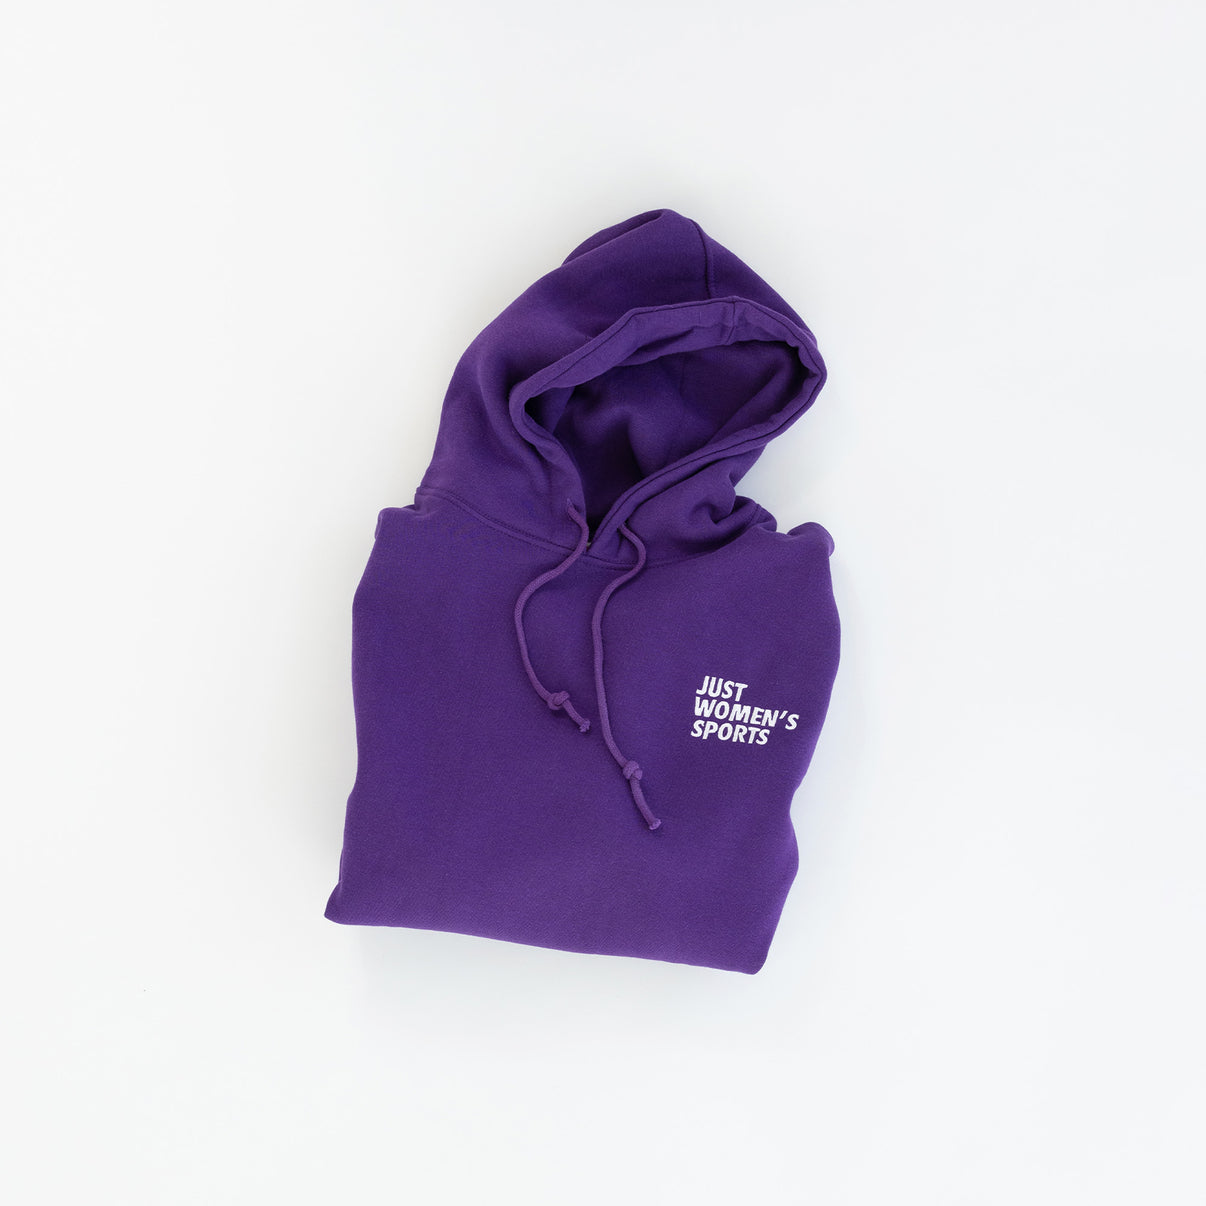 Archive Hoodie 1.0 – Just Women's Sports